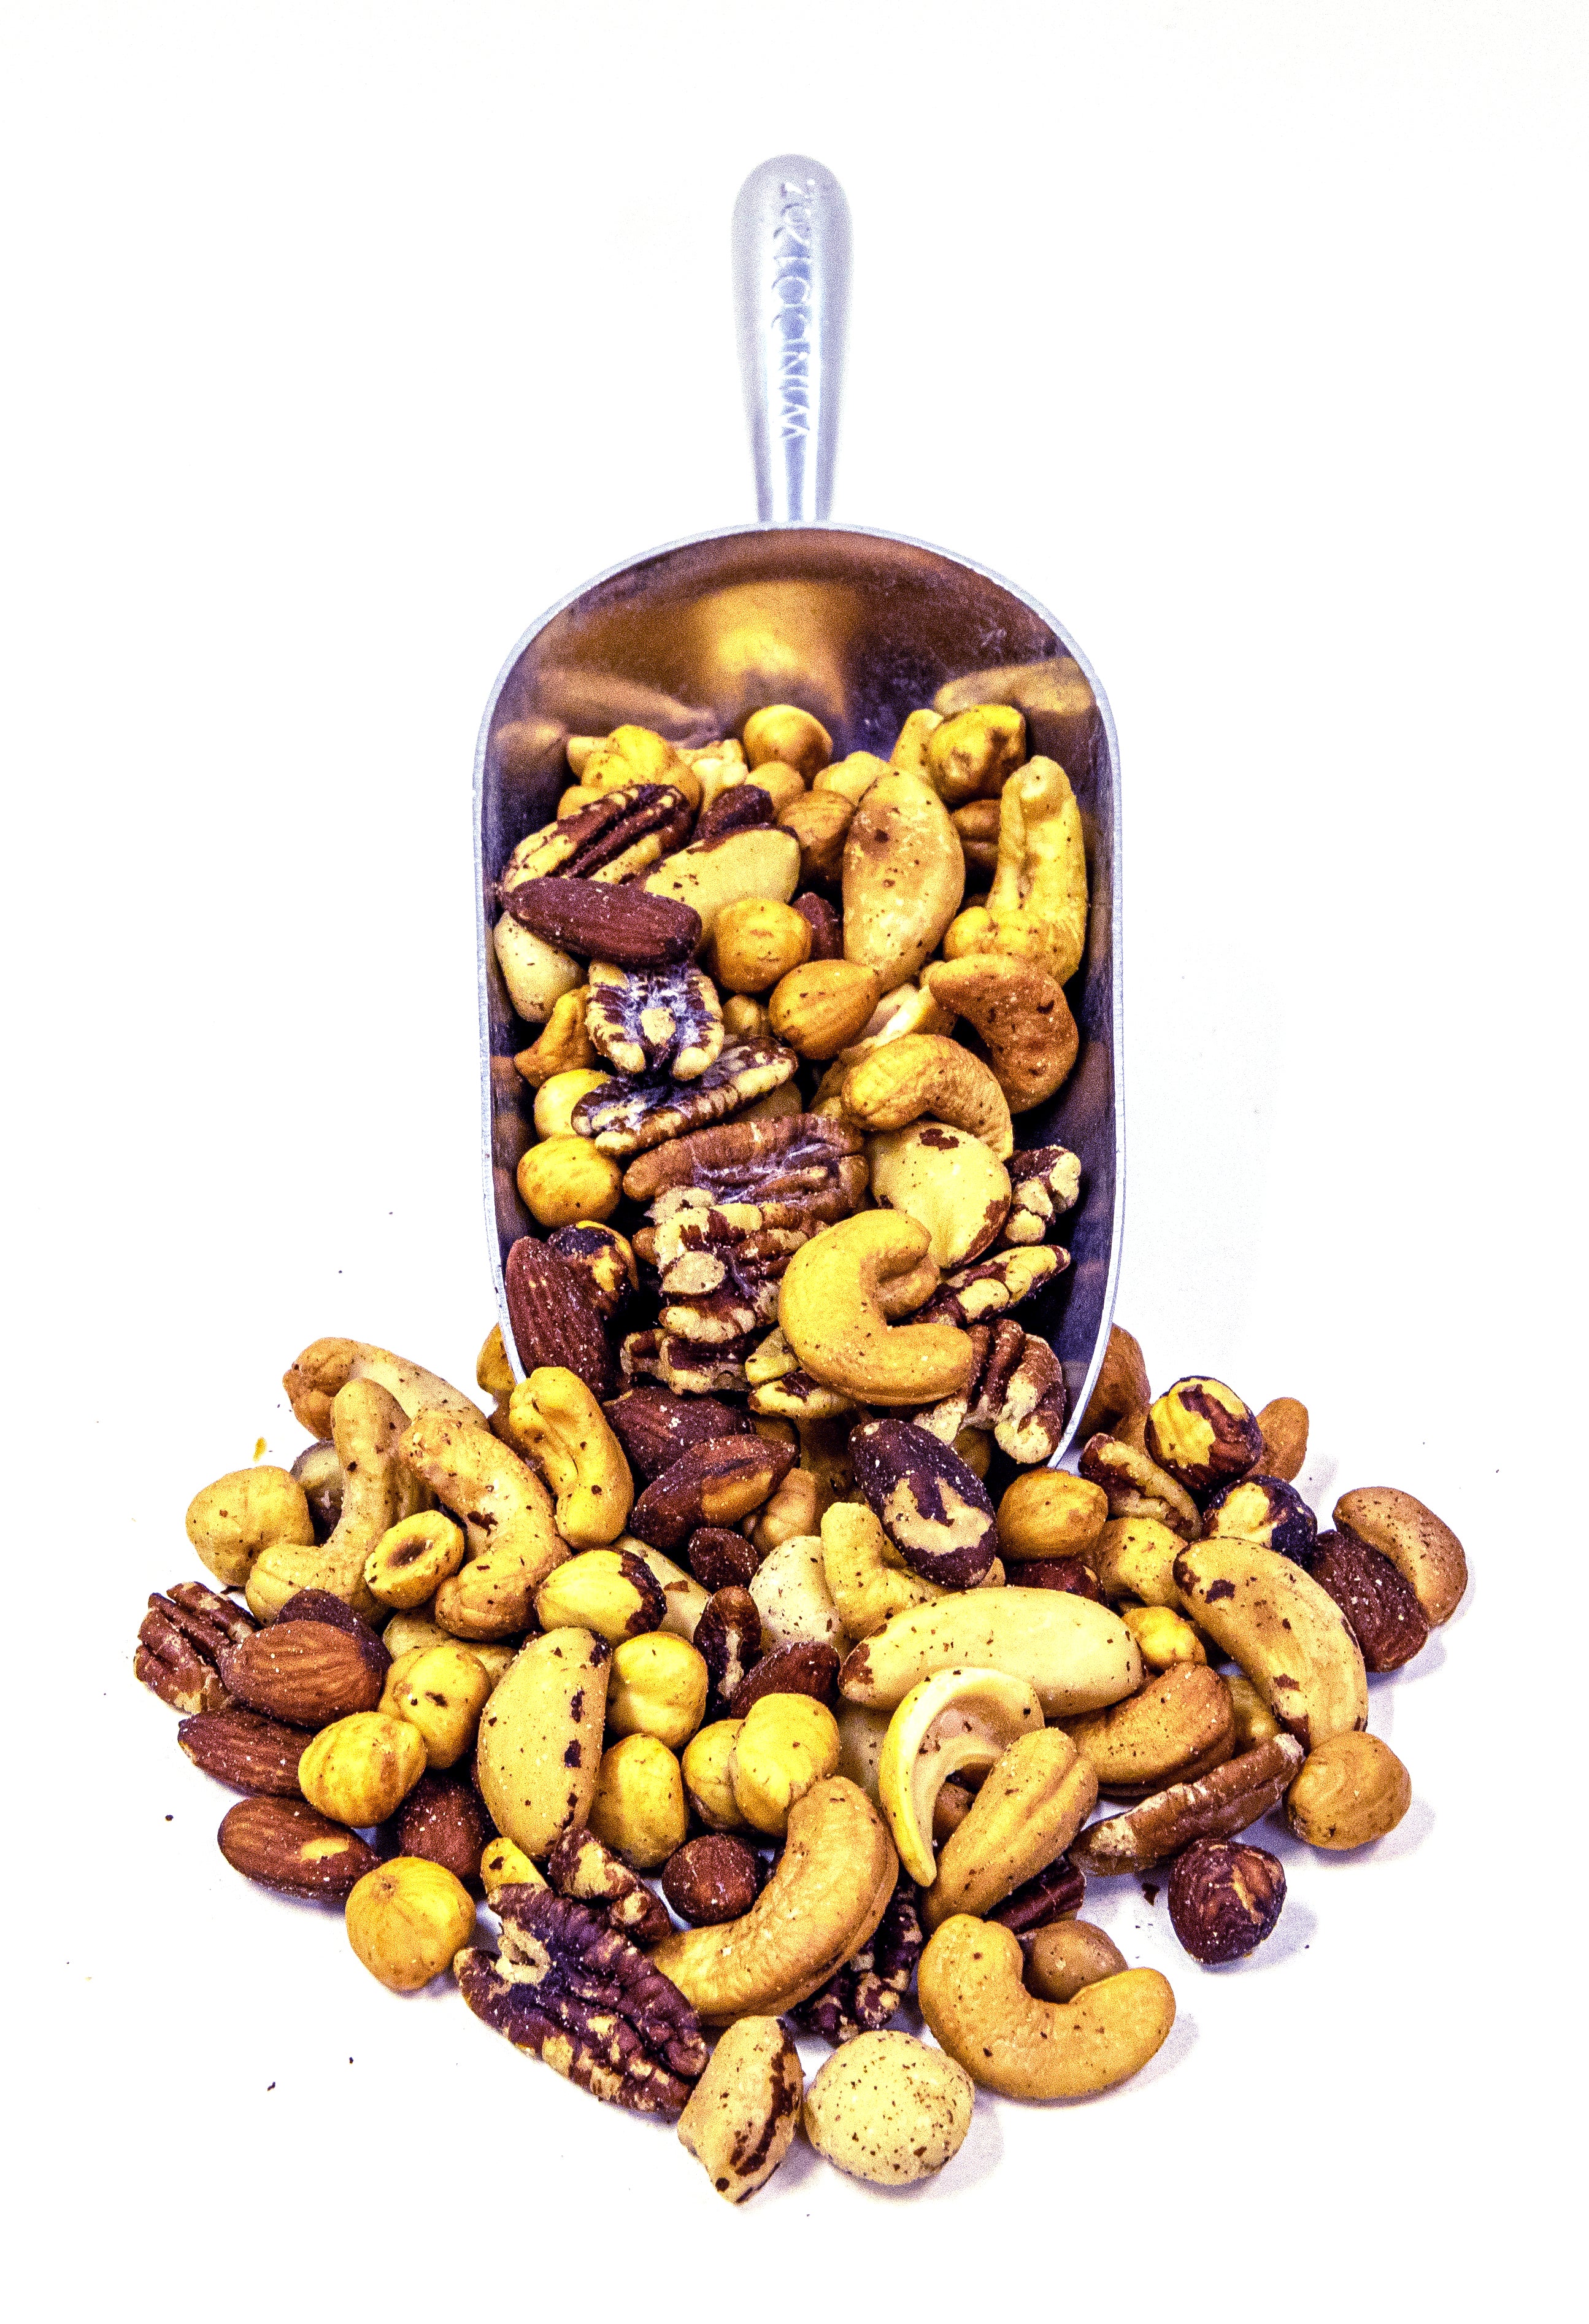 Roasted & Salted Gourmet Mixed Nuts